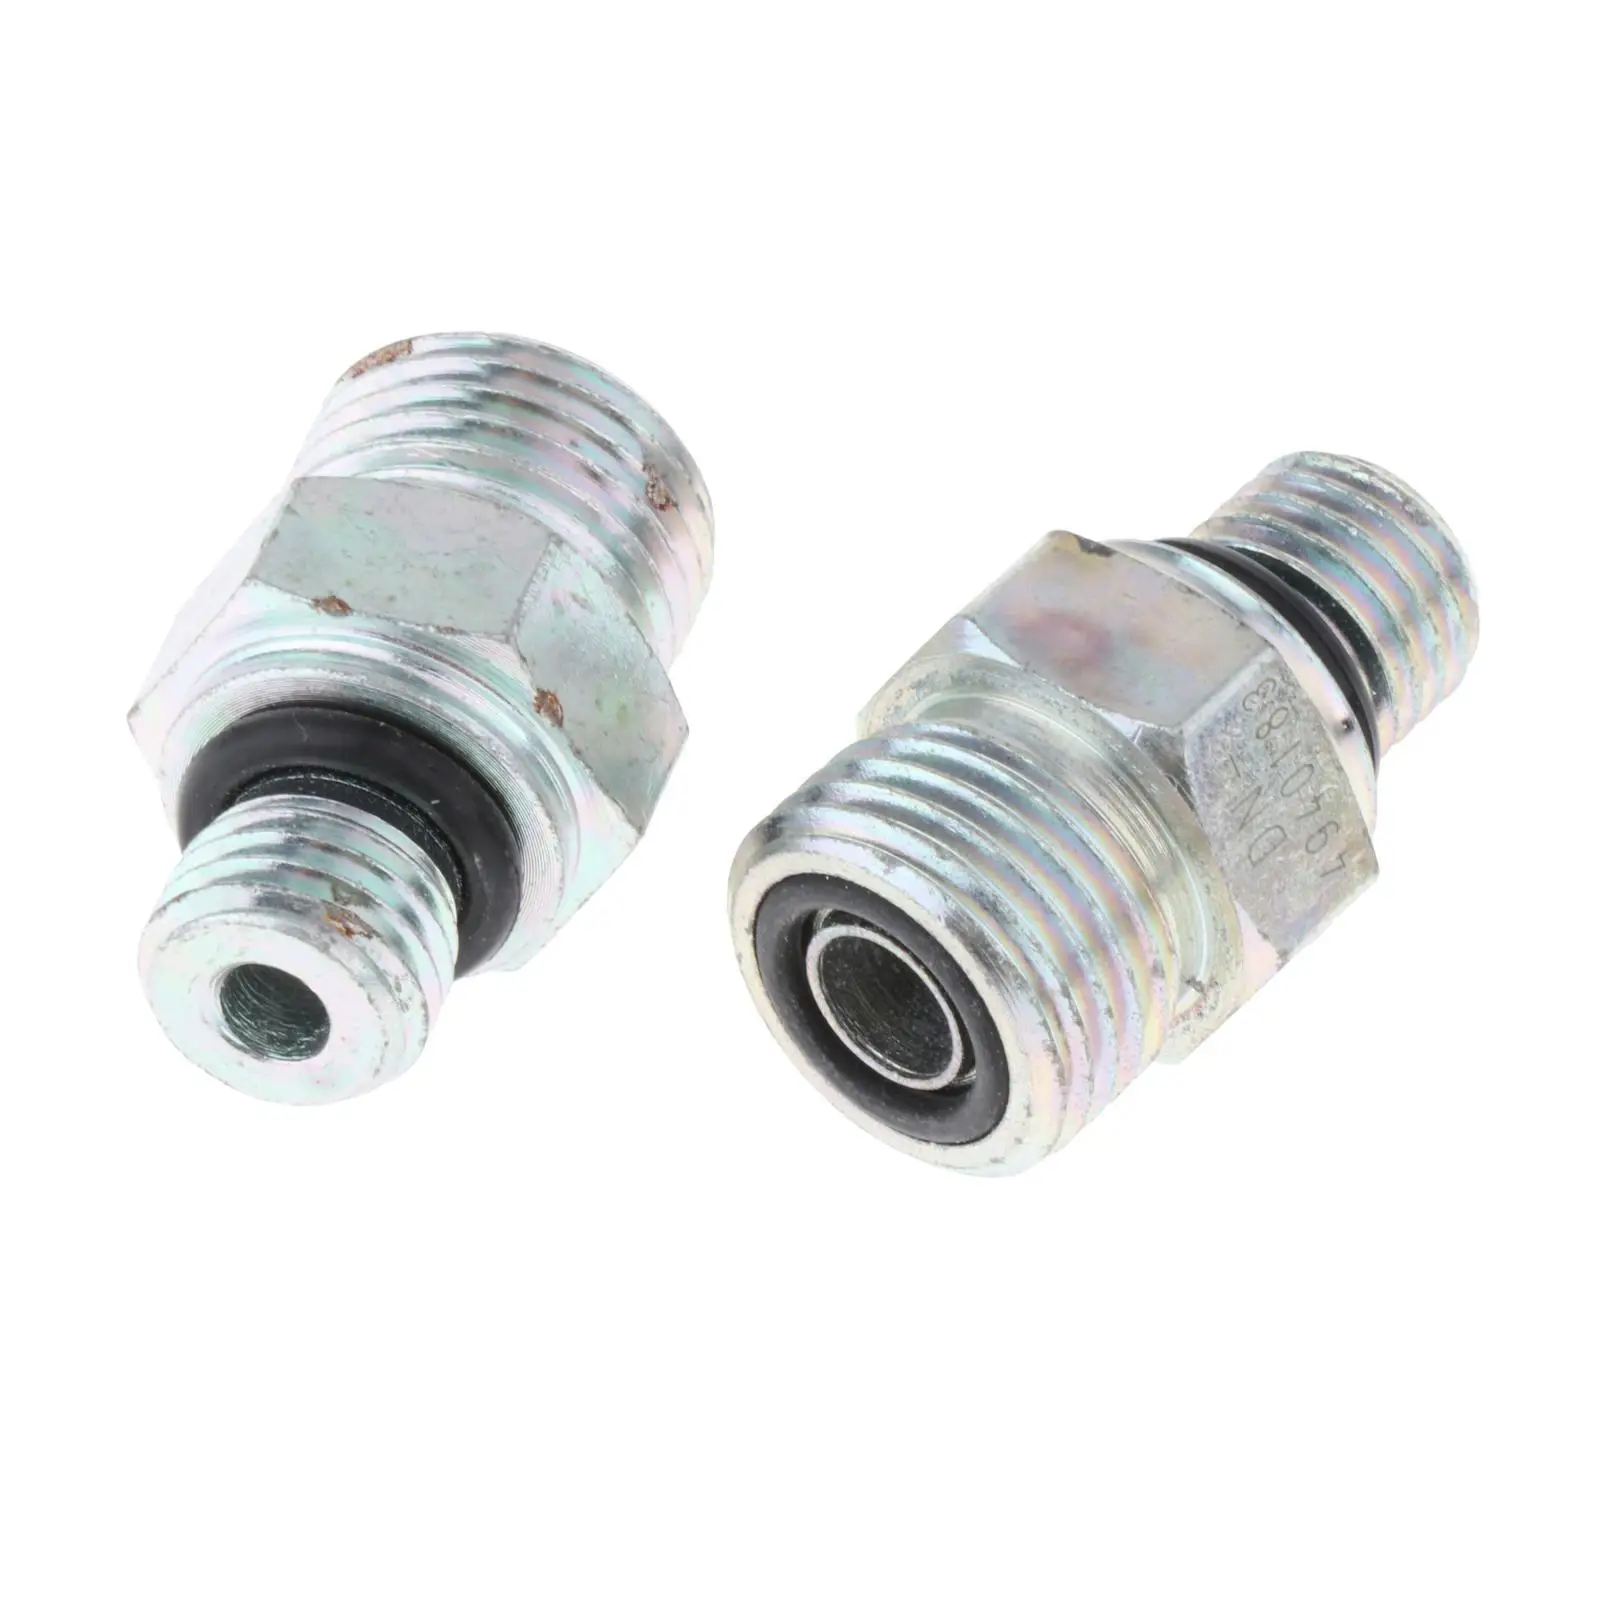 2x Replacement Turbo Oil feed Line Fitting for Auto Parts Engine Parts